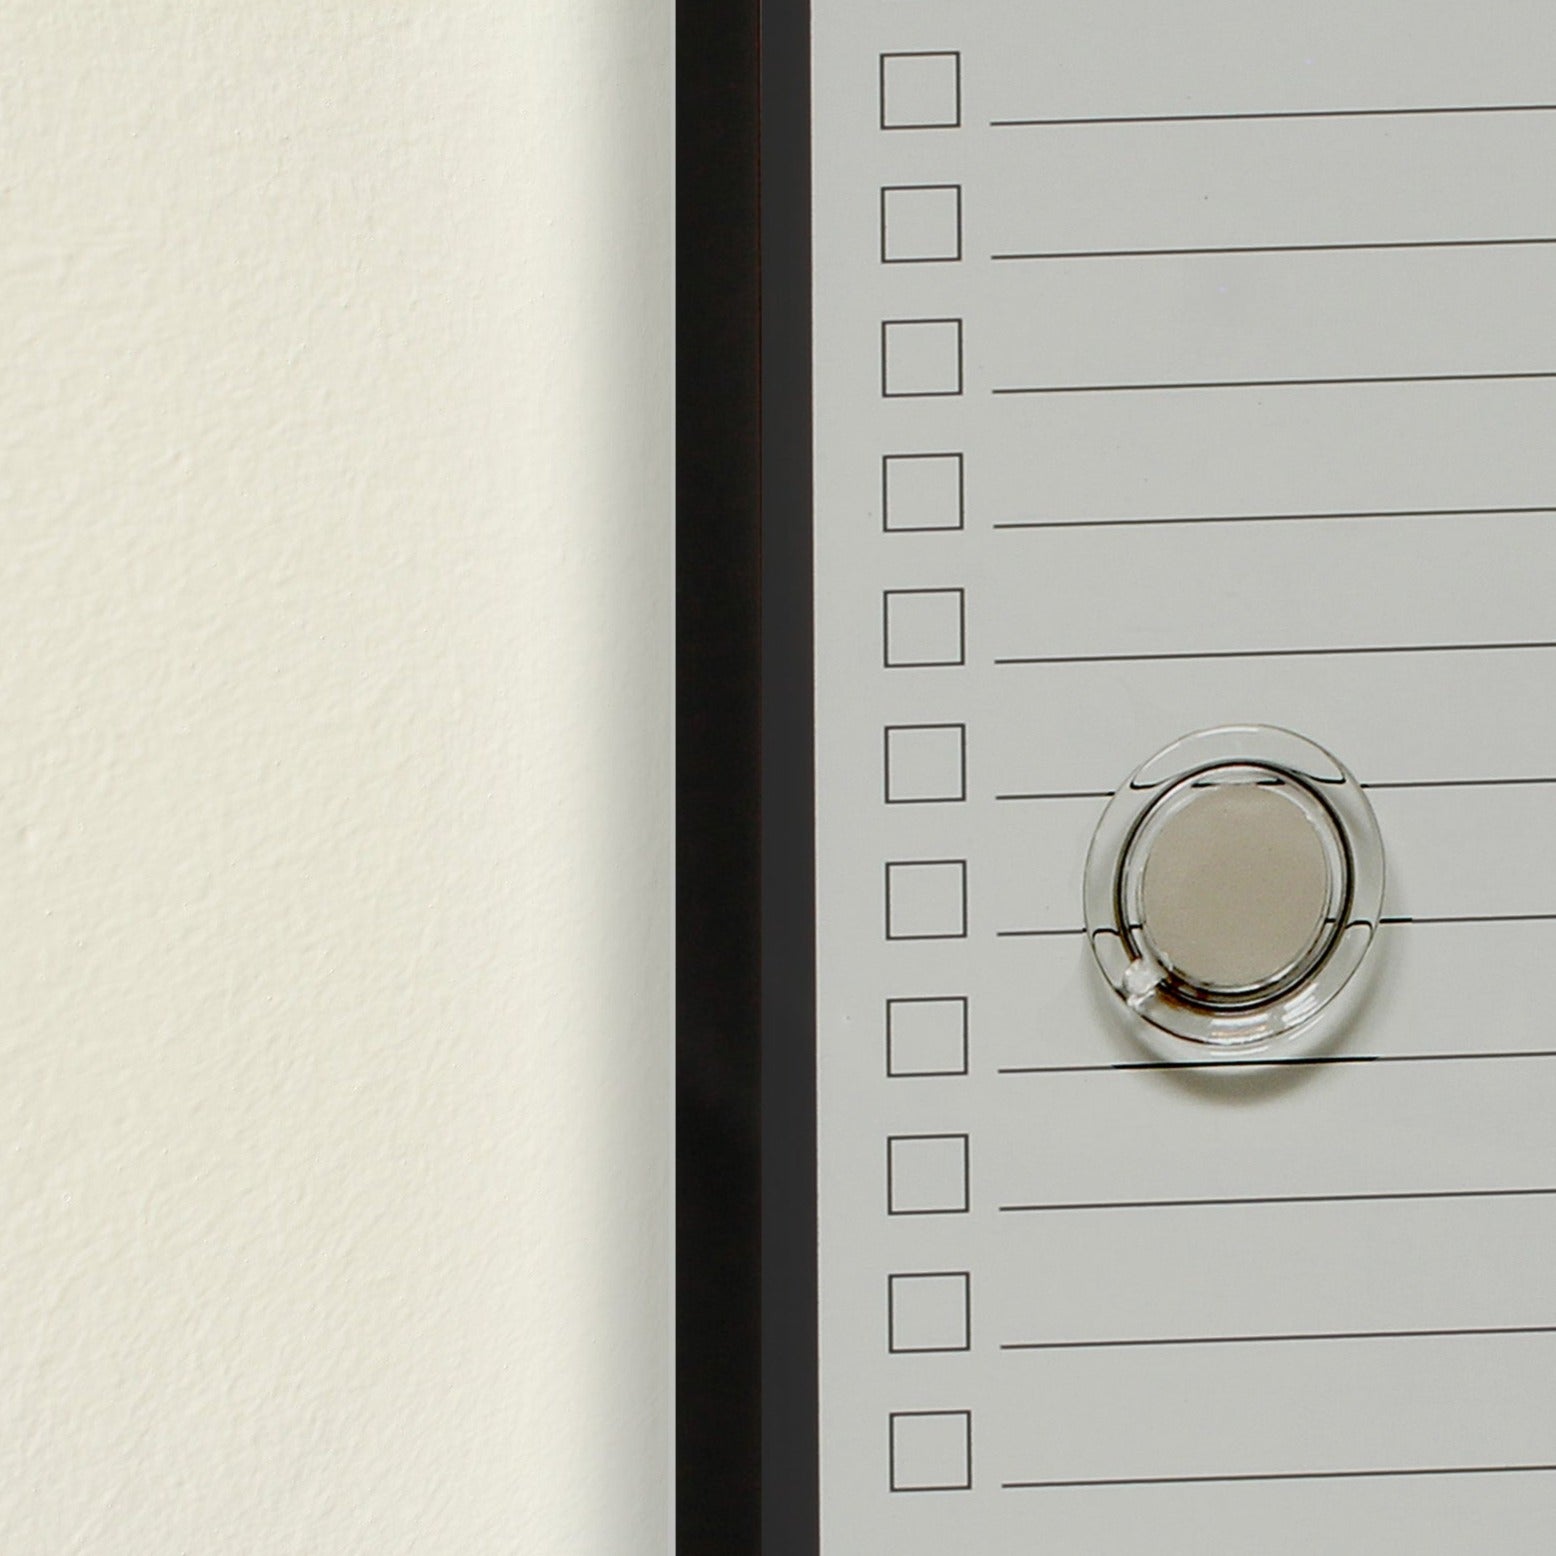 Close-up of a frameless dry 'To Do' planner board, size 15 x 35 cm, with a black border and a round, transparent magnet. The board displays empty checkboxes alongside lined spaces for tasks to be written.